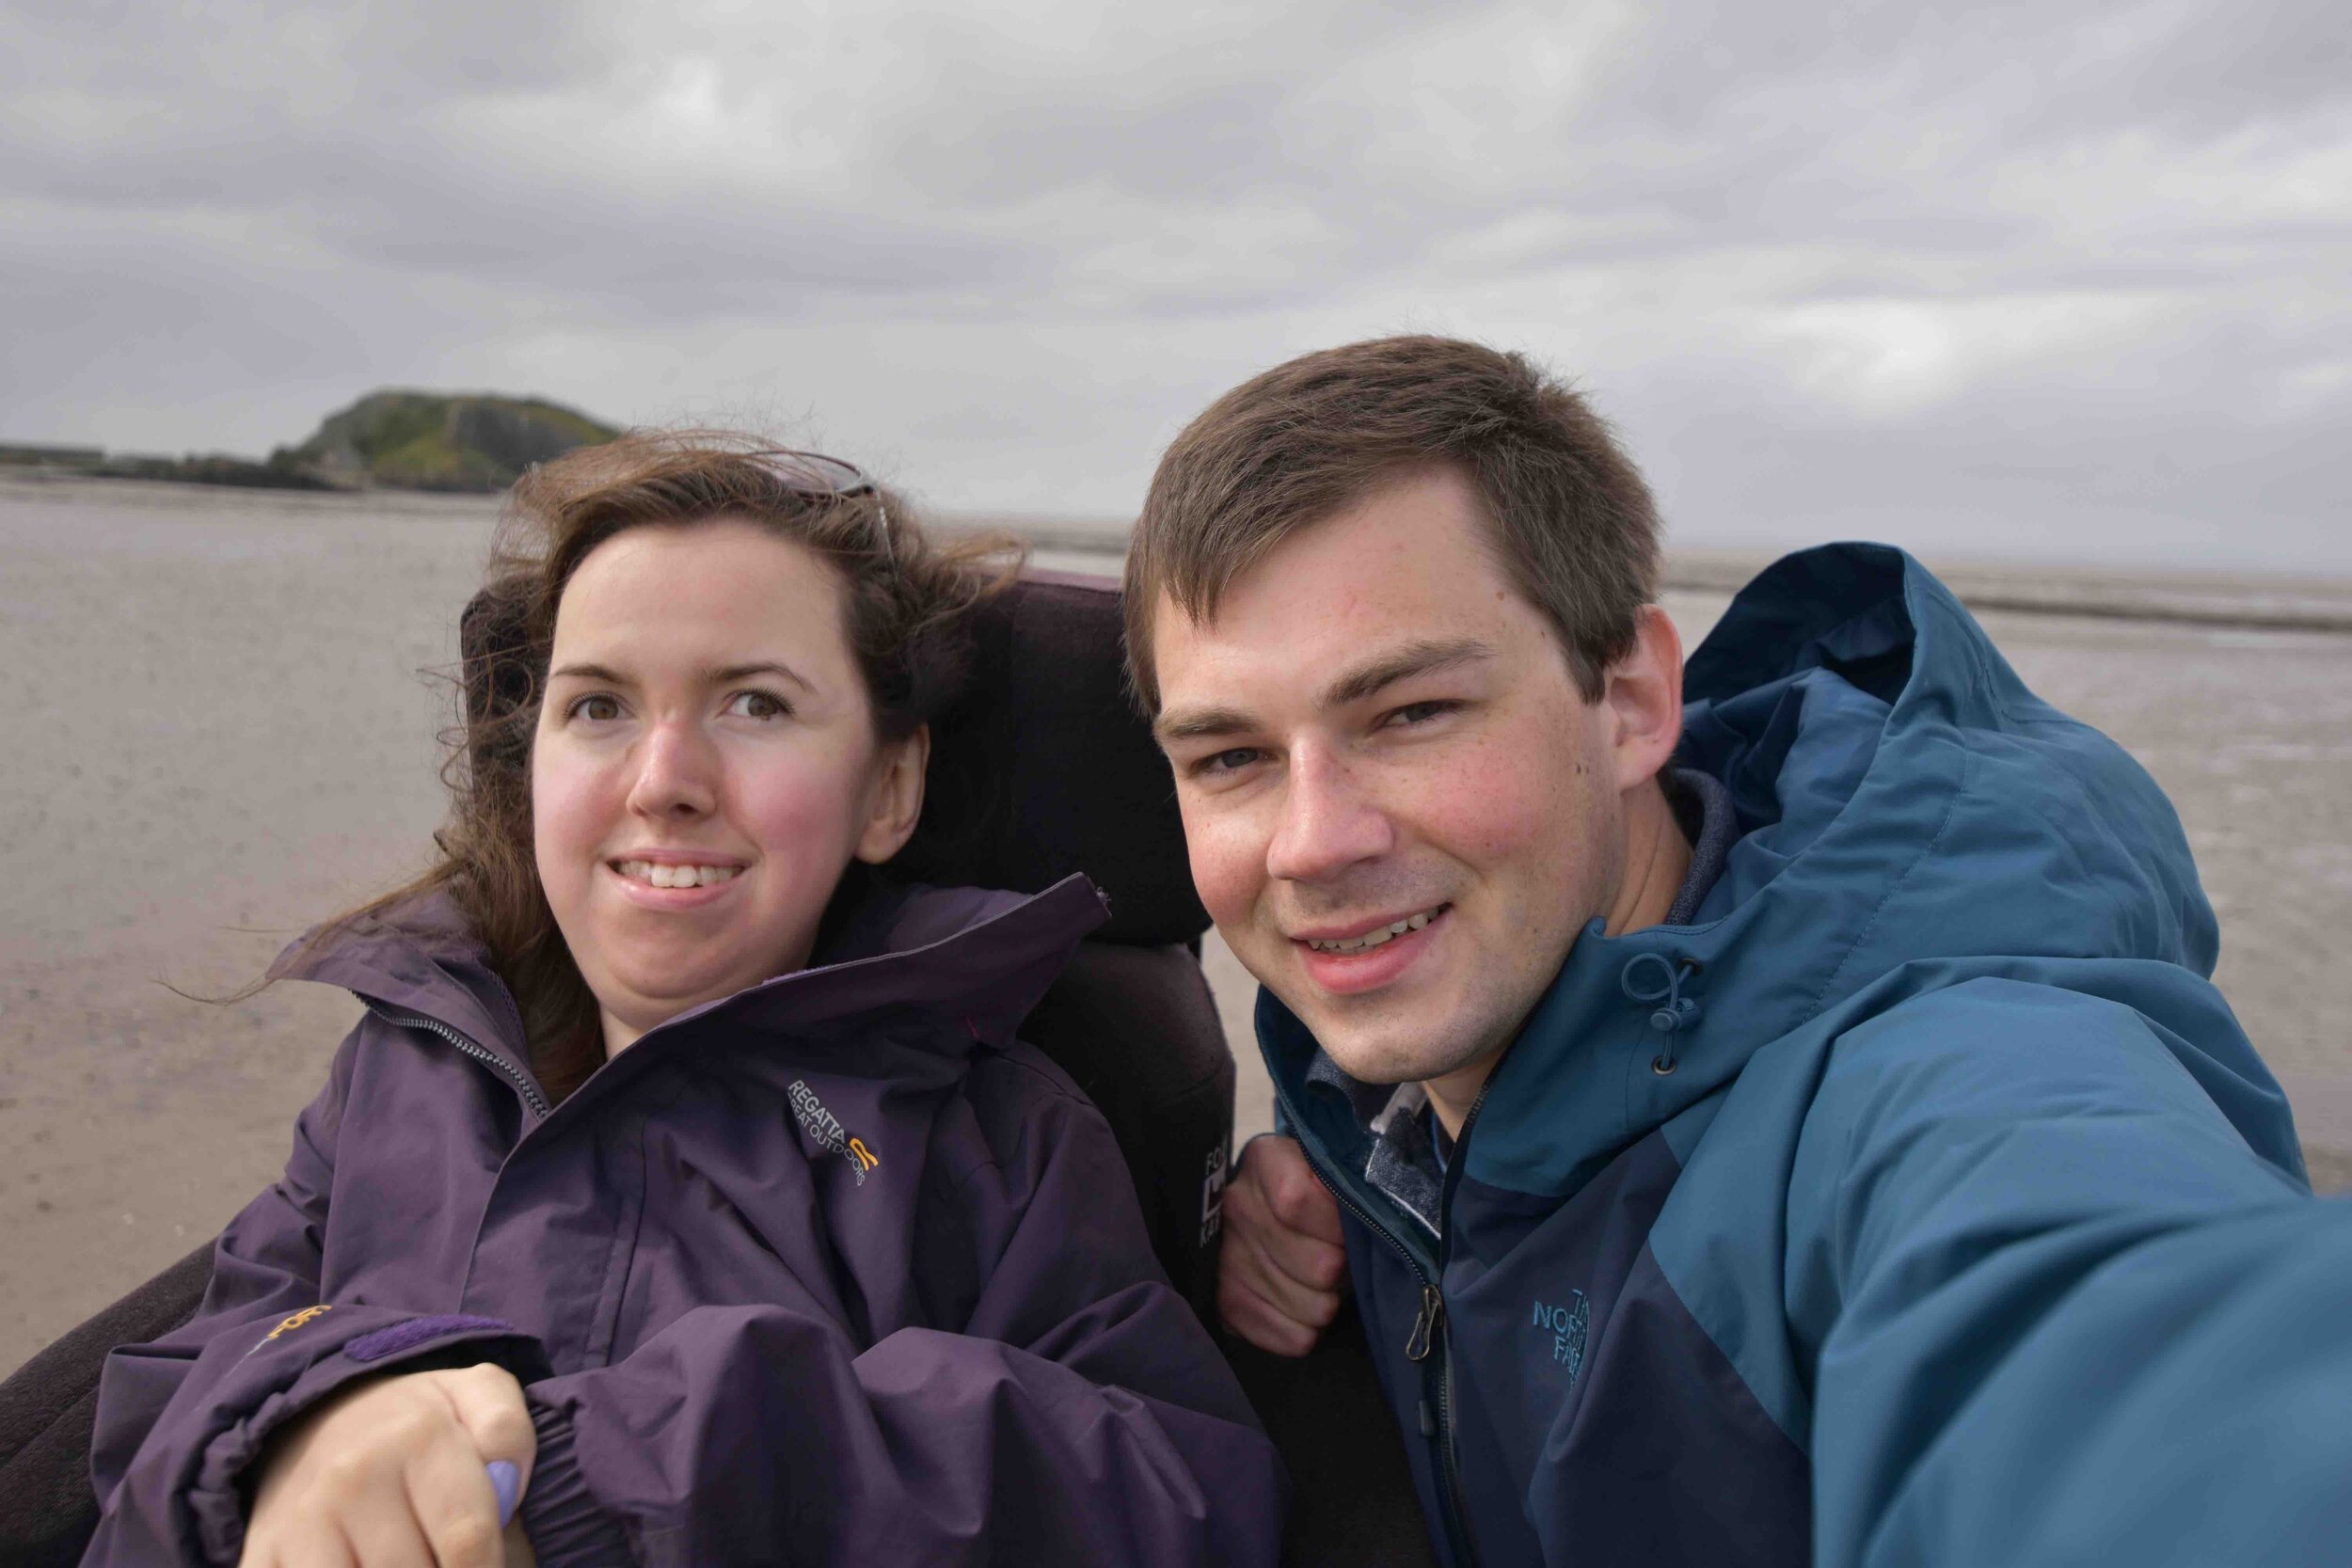 Interabled couple on Uphill beach